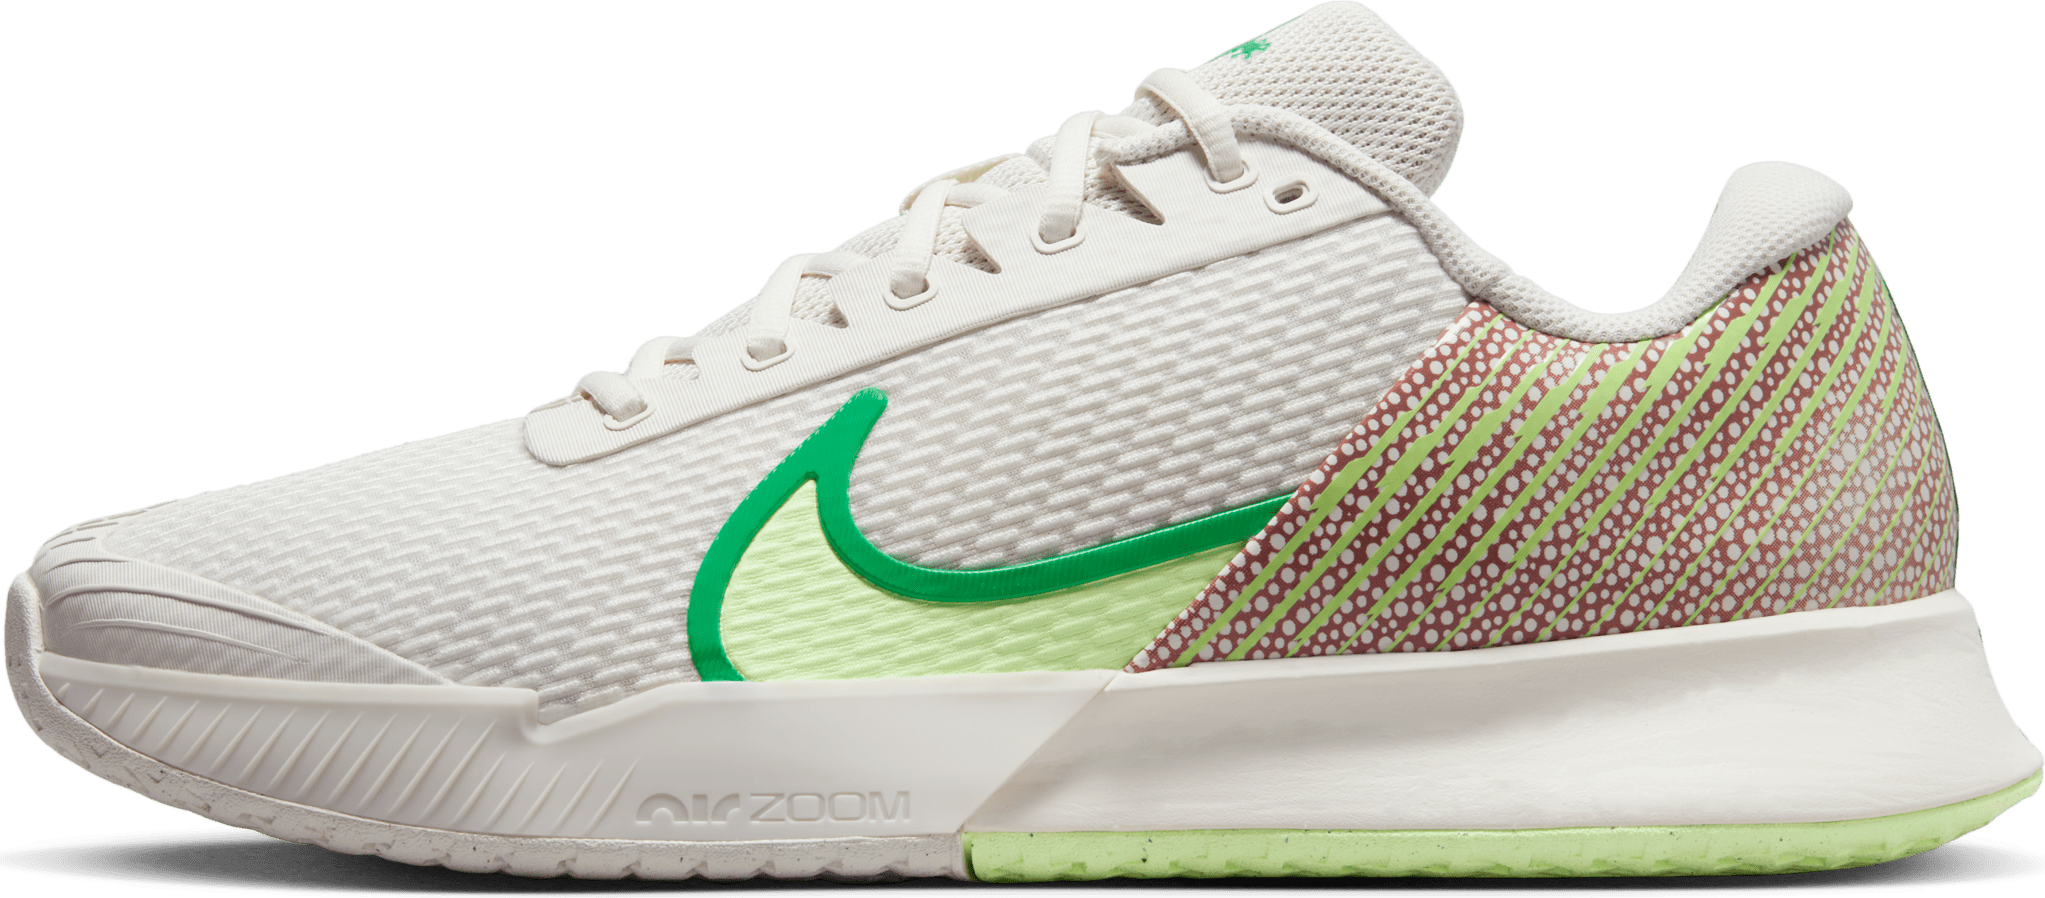 Nike court air zoom vapor pro 2 • Compare prices